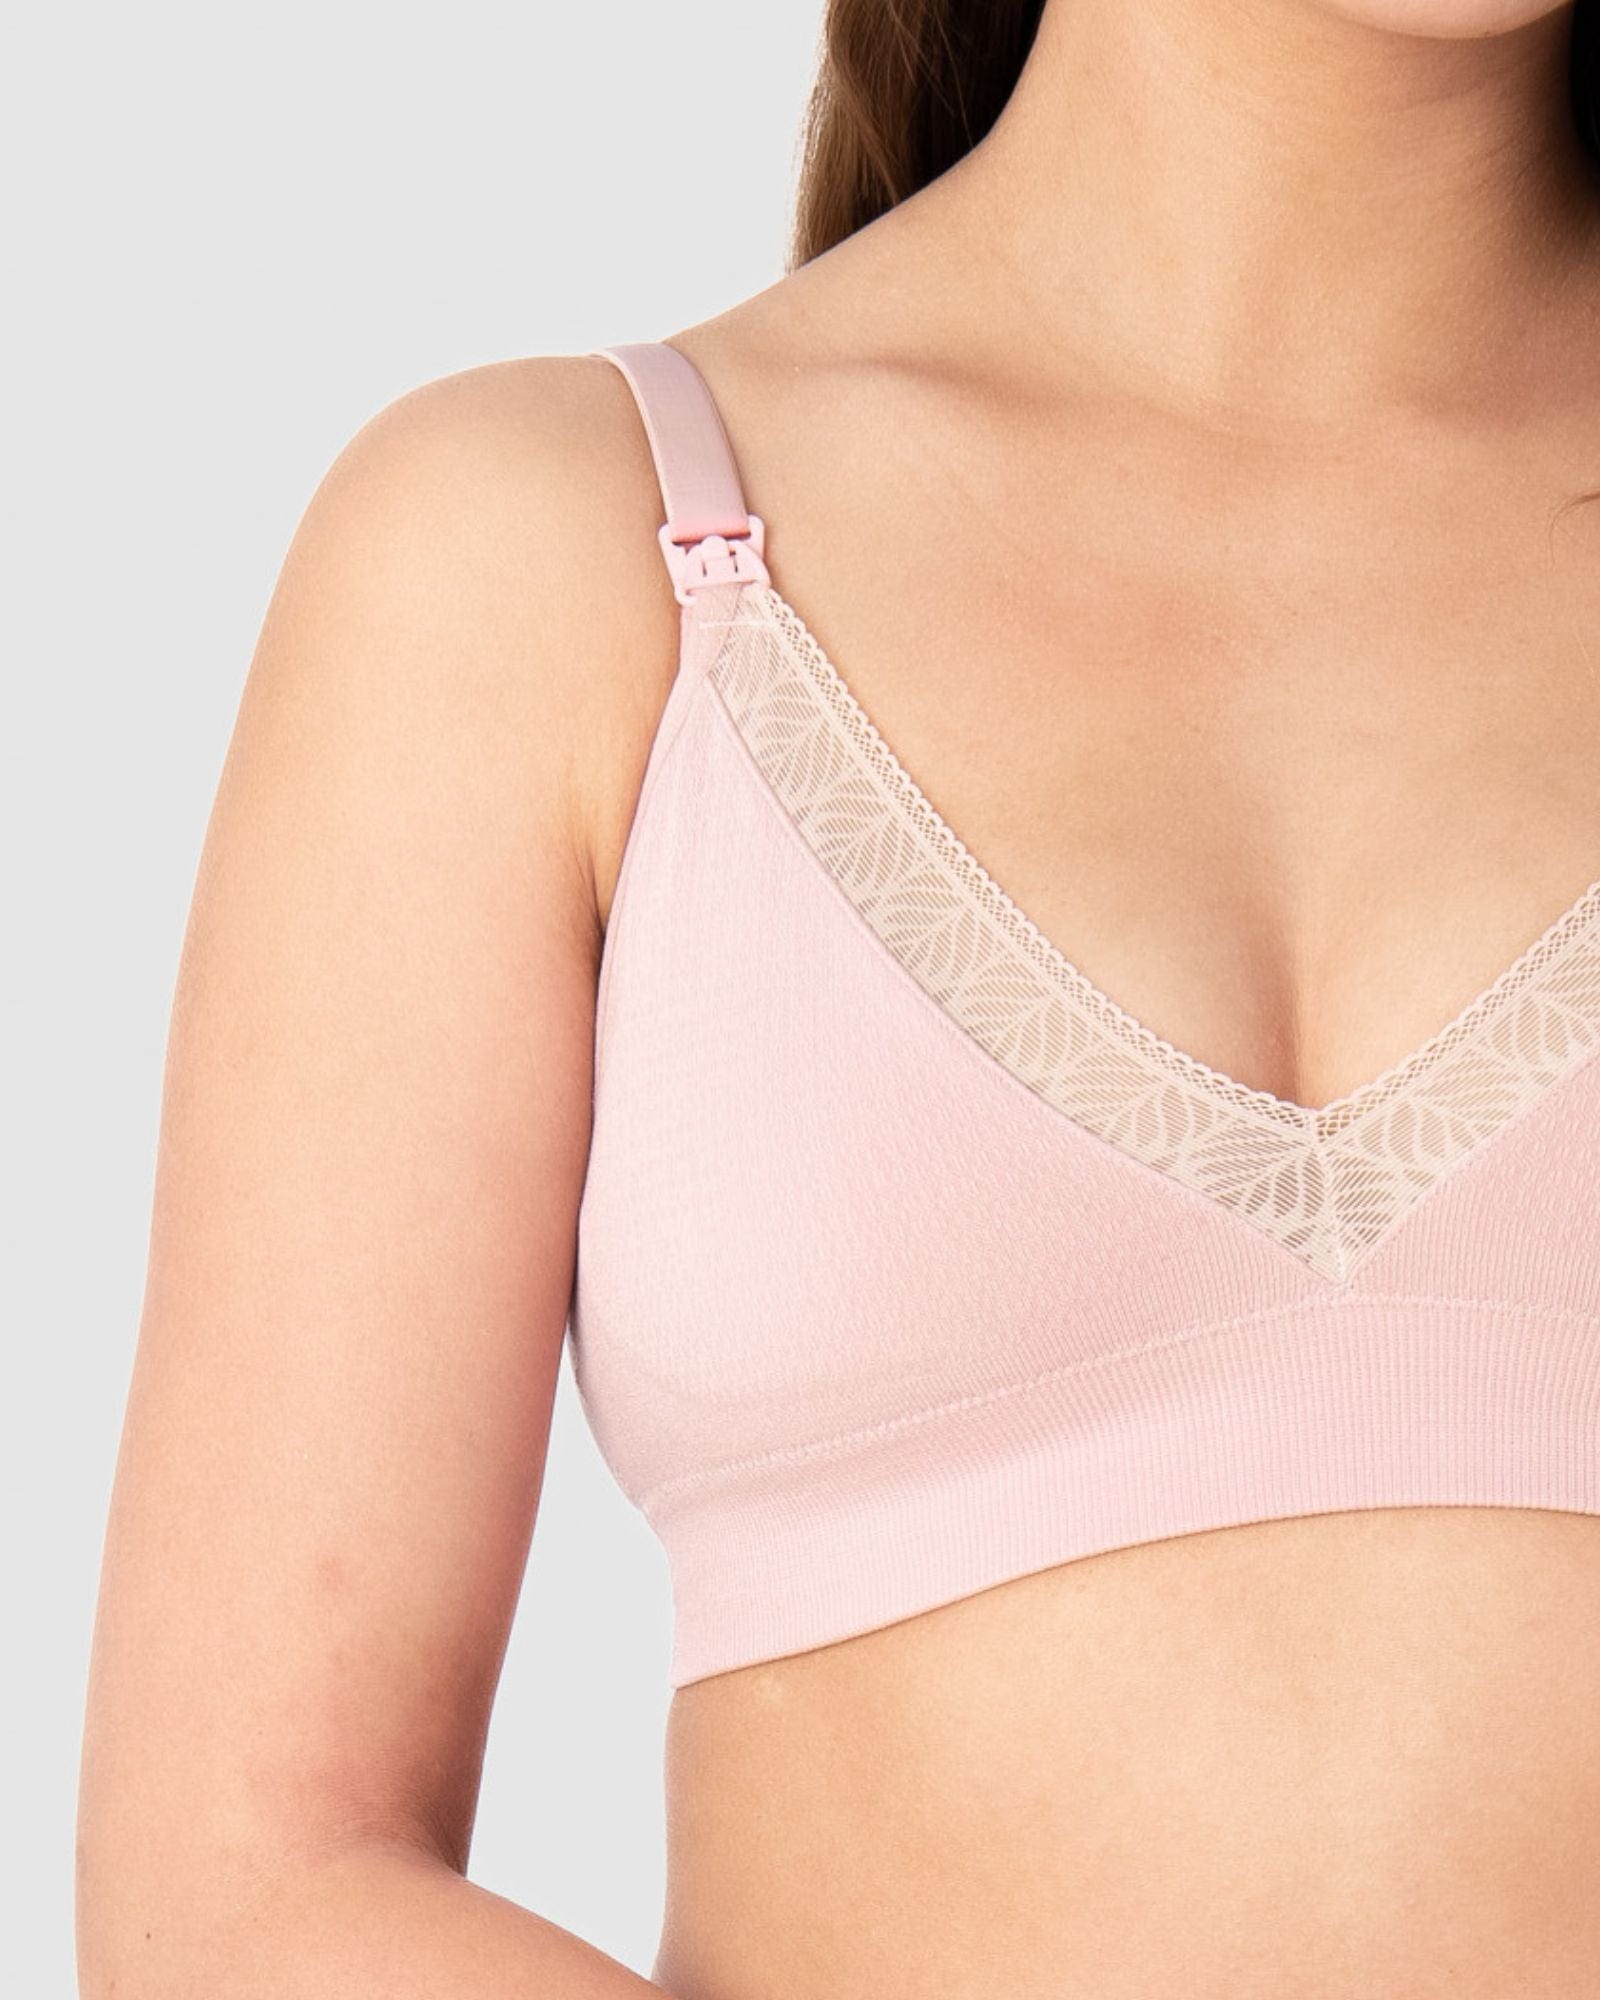 MyRunway  Shop Woolworths Cotton Non-wire Nursing Bras 2 Pack for Women  from